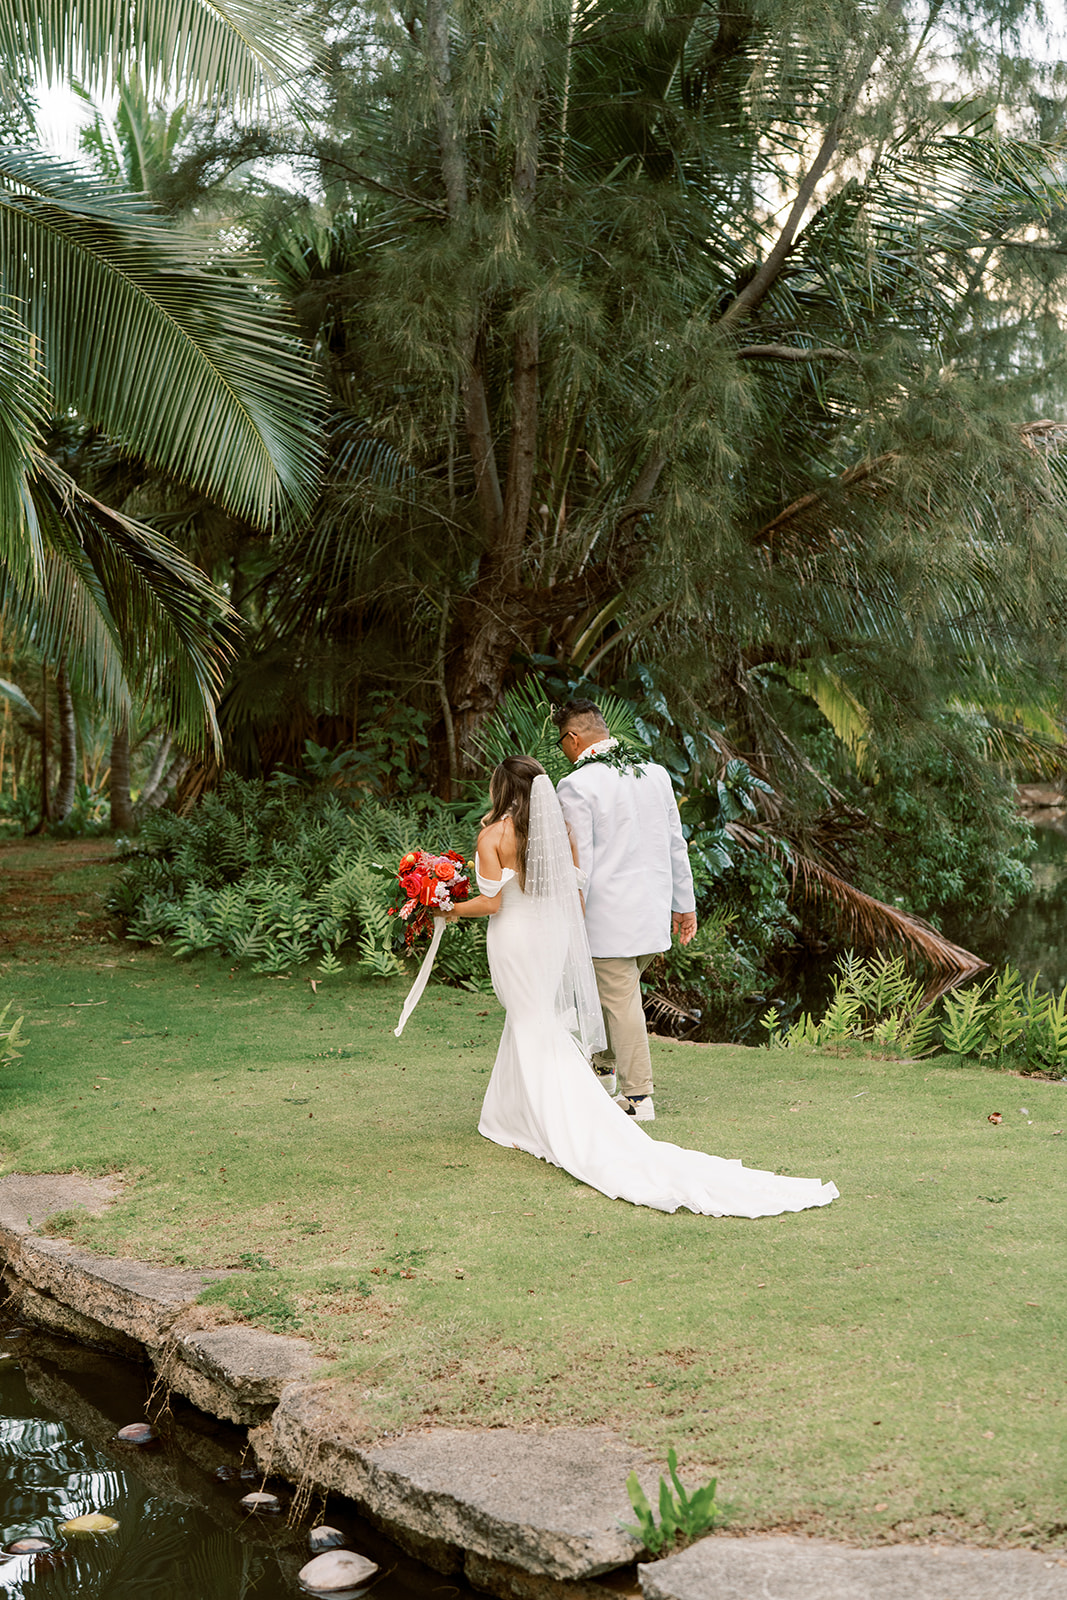 Bride and groom holding hands and walking through a lush garden in the Smiths Tropical Paradise and Luau